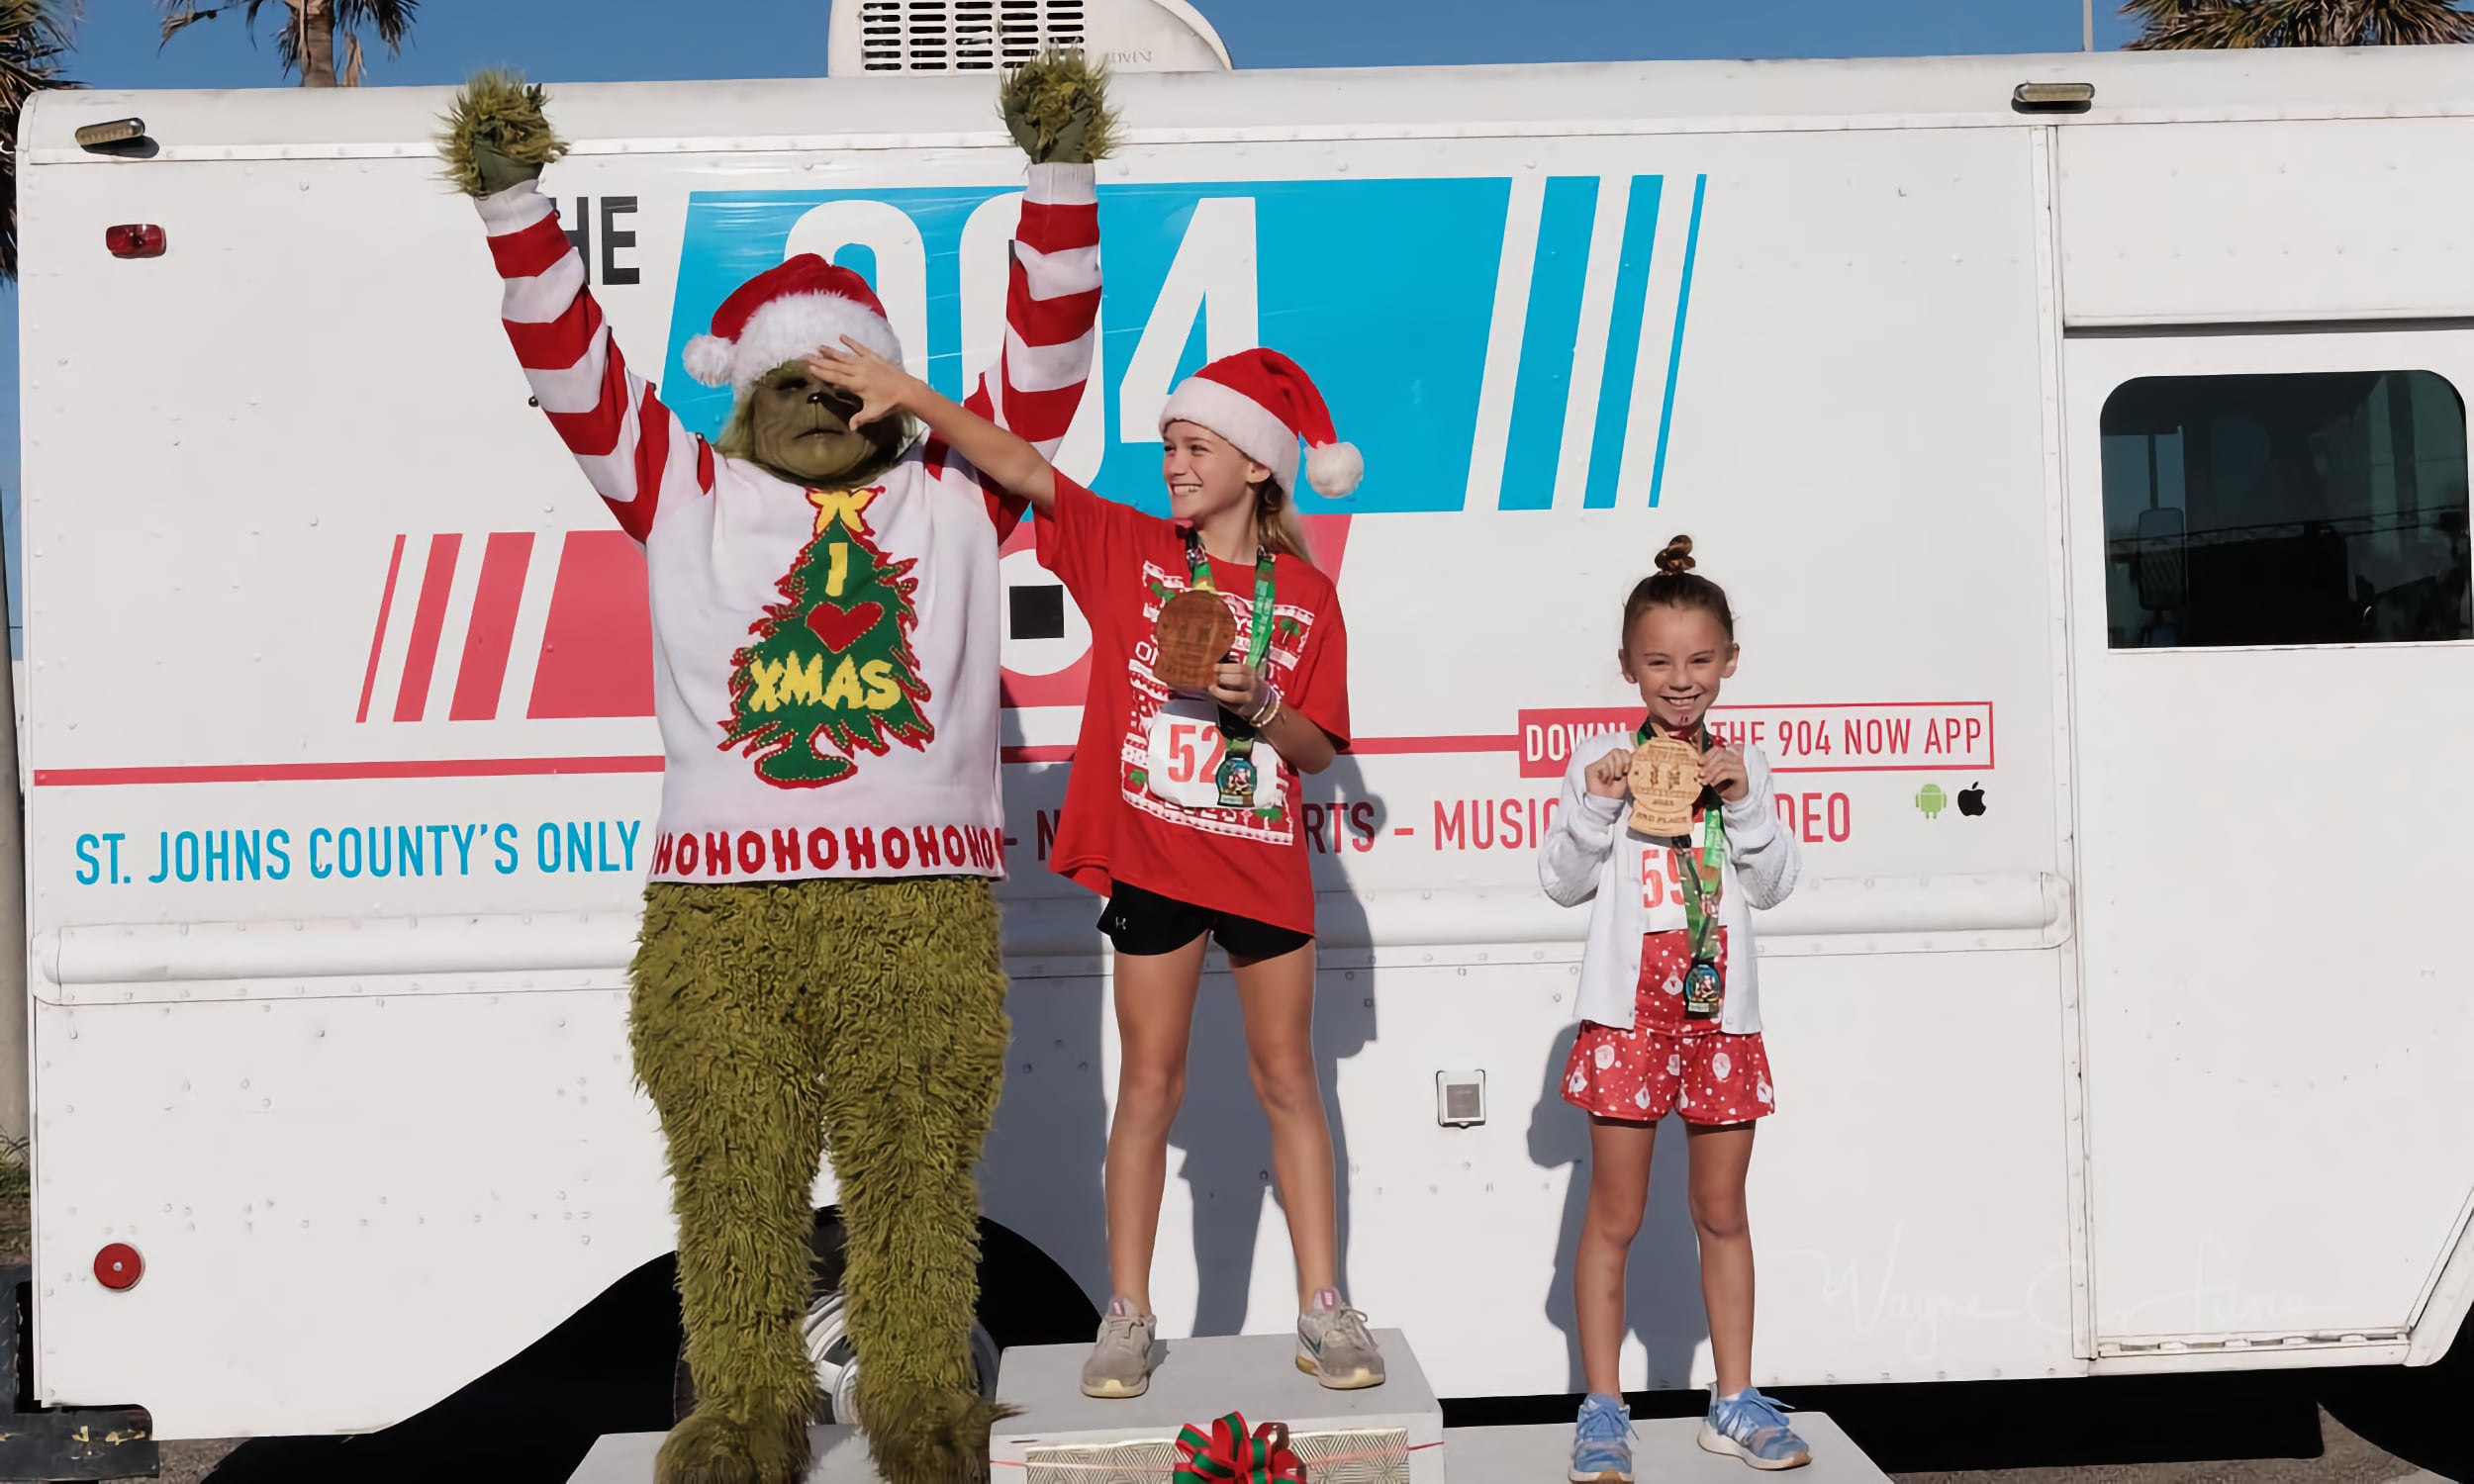 A person dressed as the Grinch celebrates with two girls showing their medals at the Santa Suits on the Loose 5K event in St. Augustine